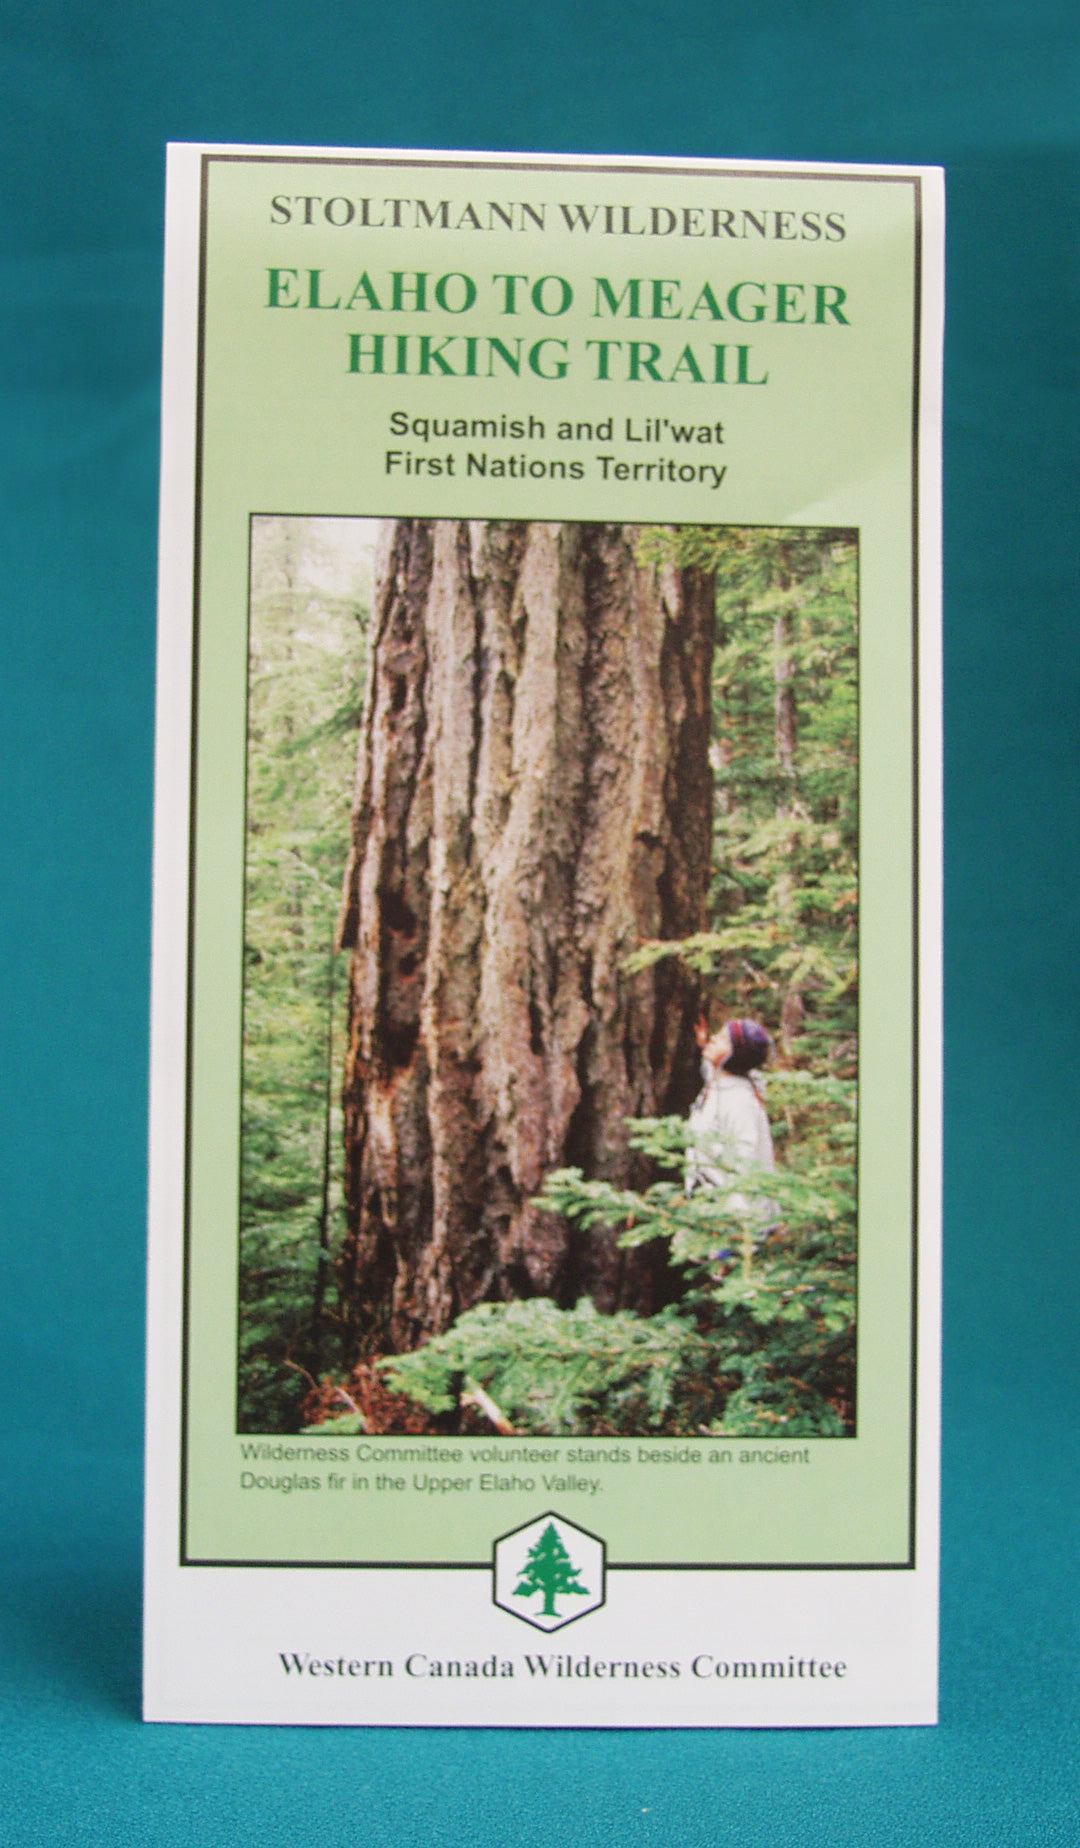 The cover of a pamphlet. There is a photo of a person standing next to an old-growth tree. Text over the image says "Stoltmann Wilderness. Elaho to Meager Hiking Trail. Squamish and Lil'wat First Nations Territory." There is a logo of the Wilderness Committee. End of image description.